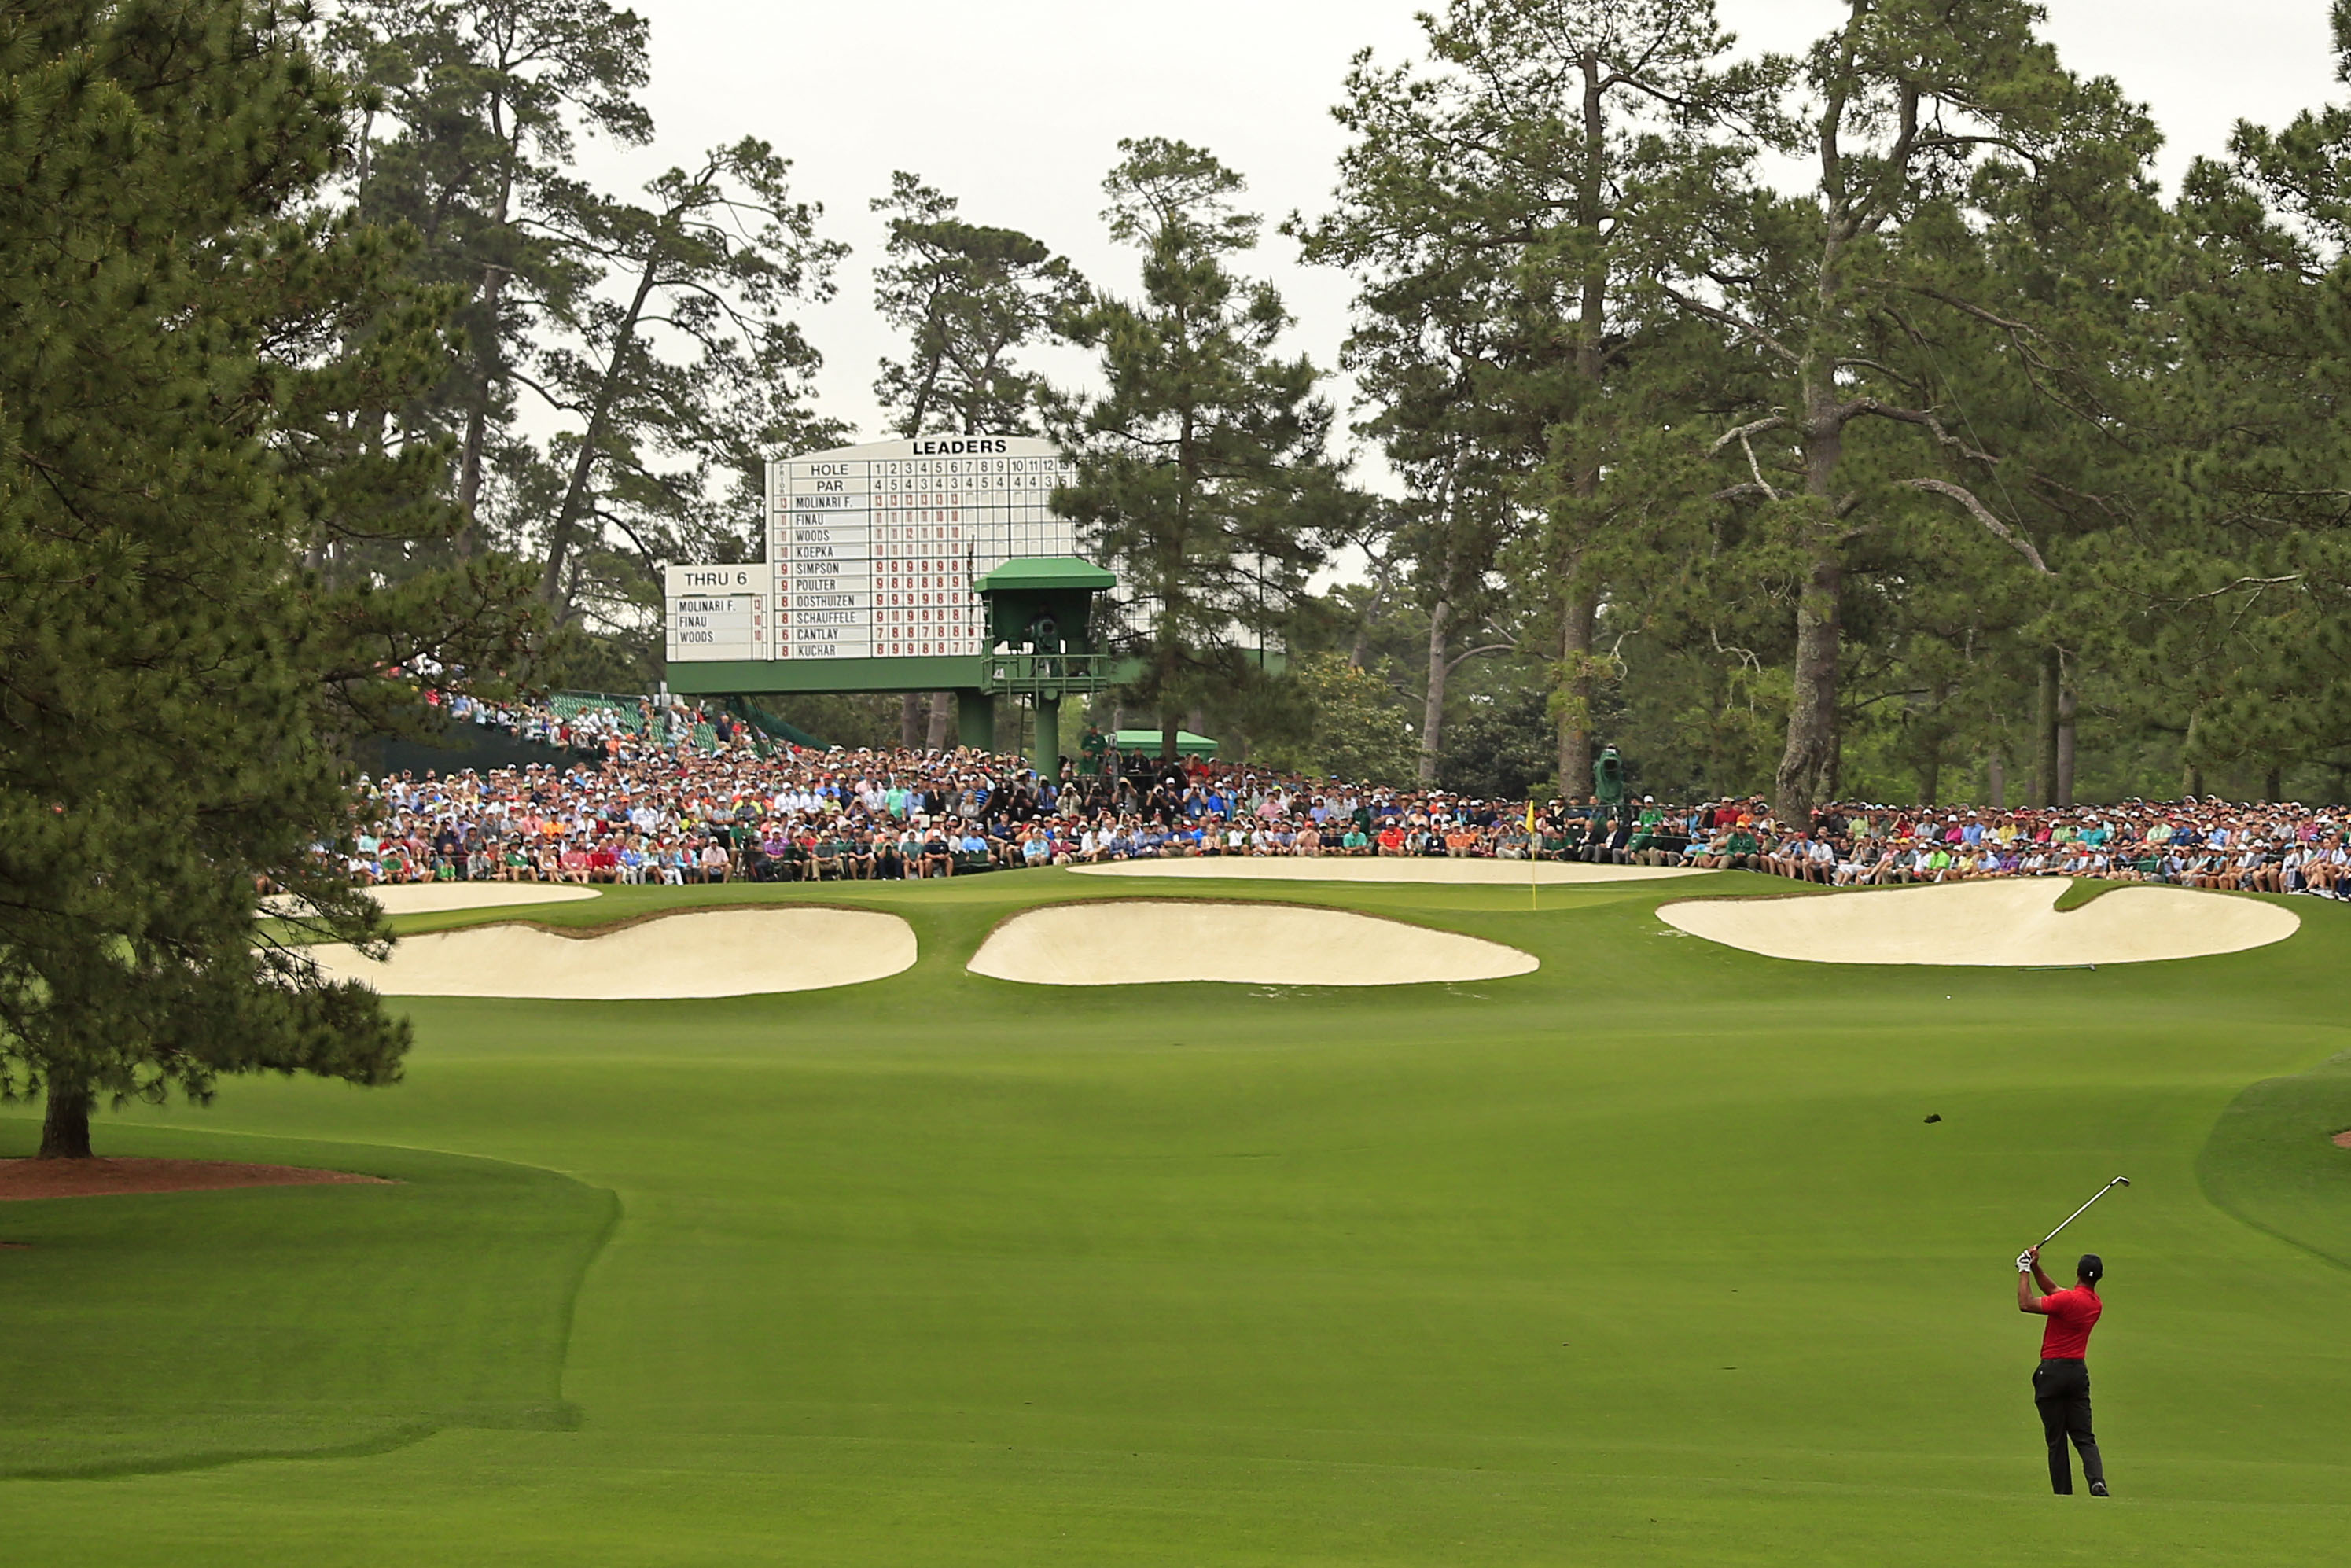 The Best Designed Holes at Augusta National, According to Masters